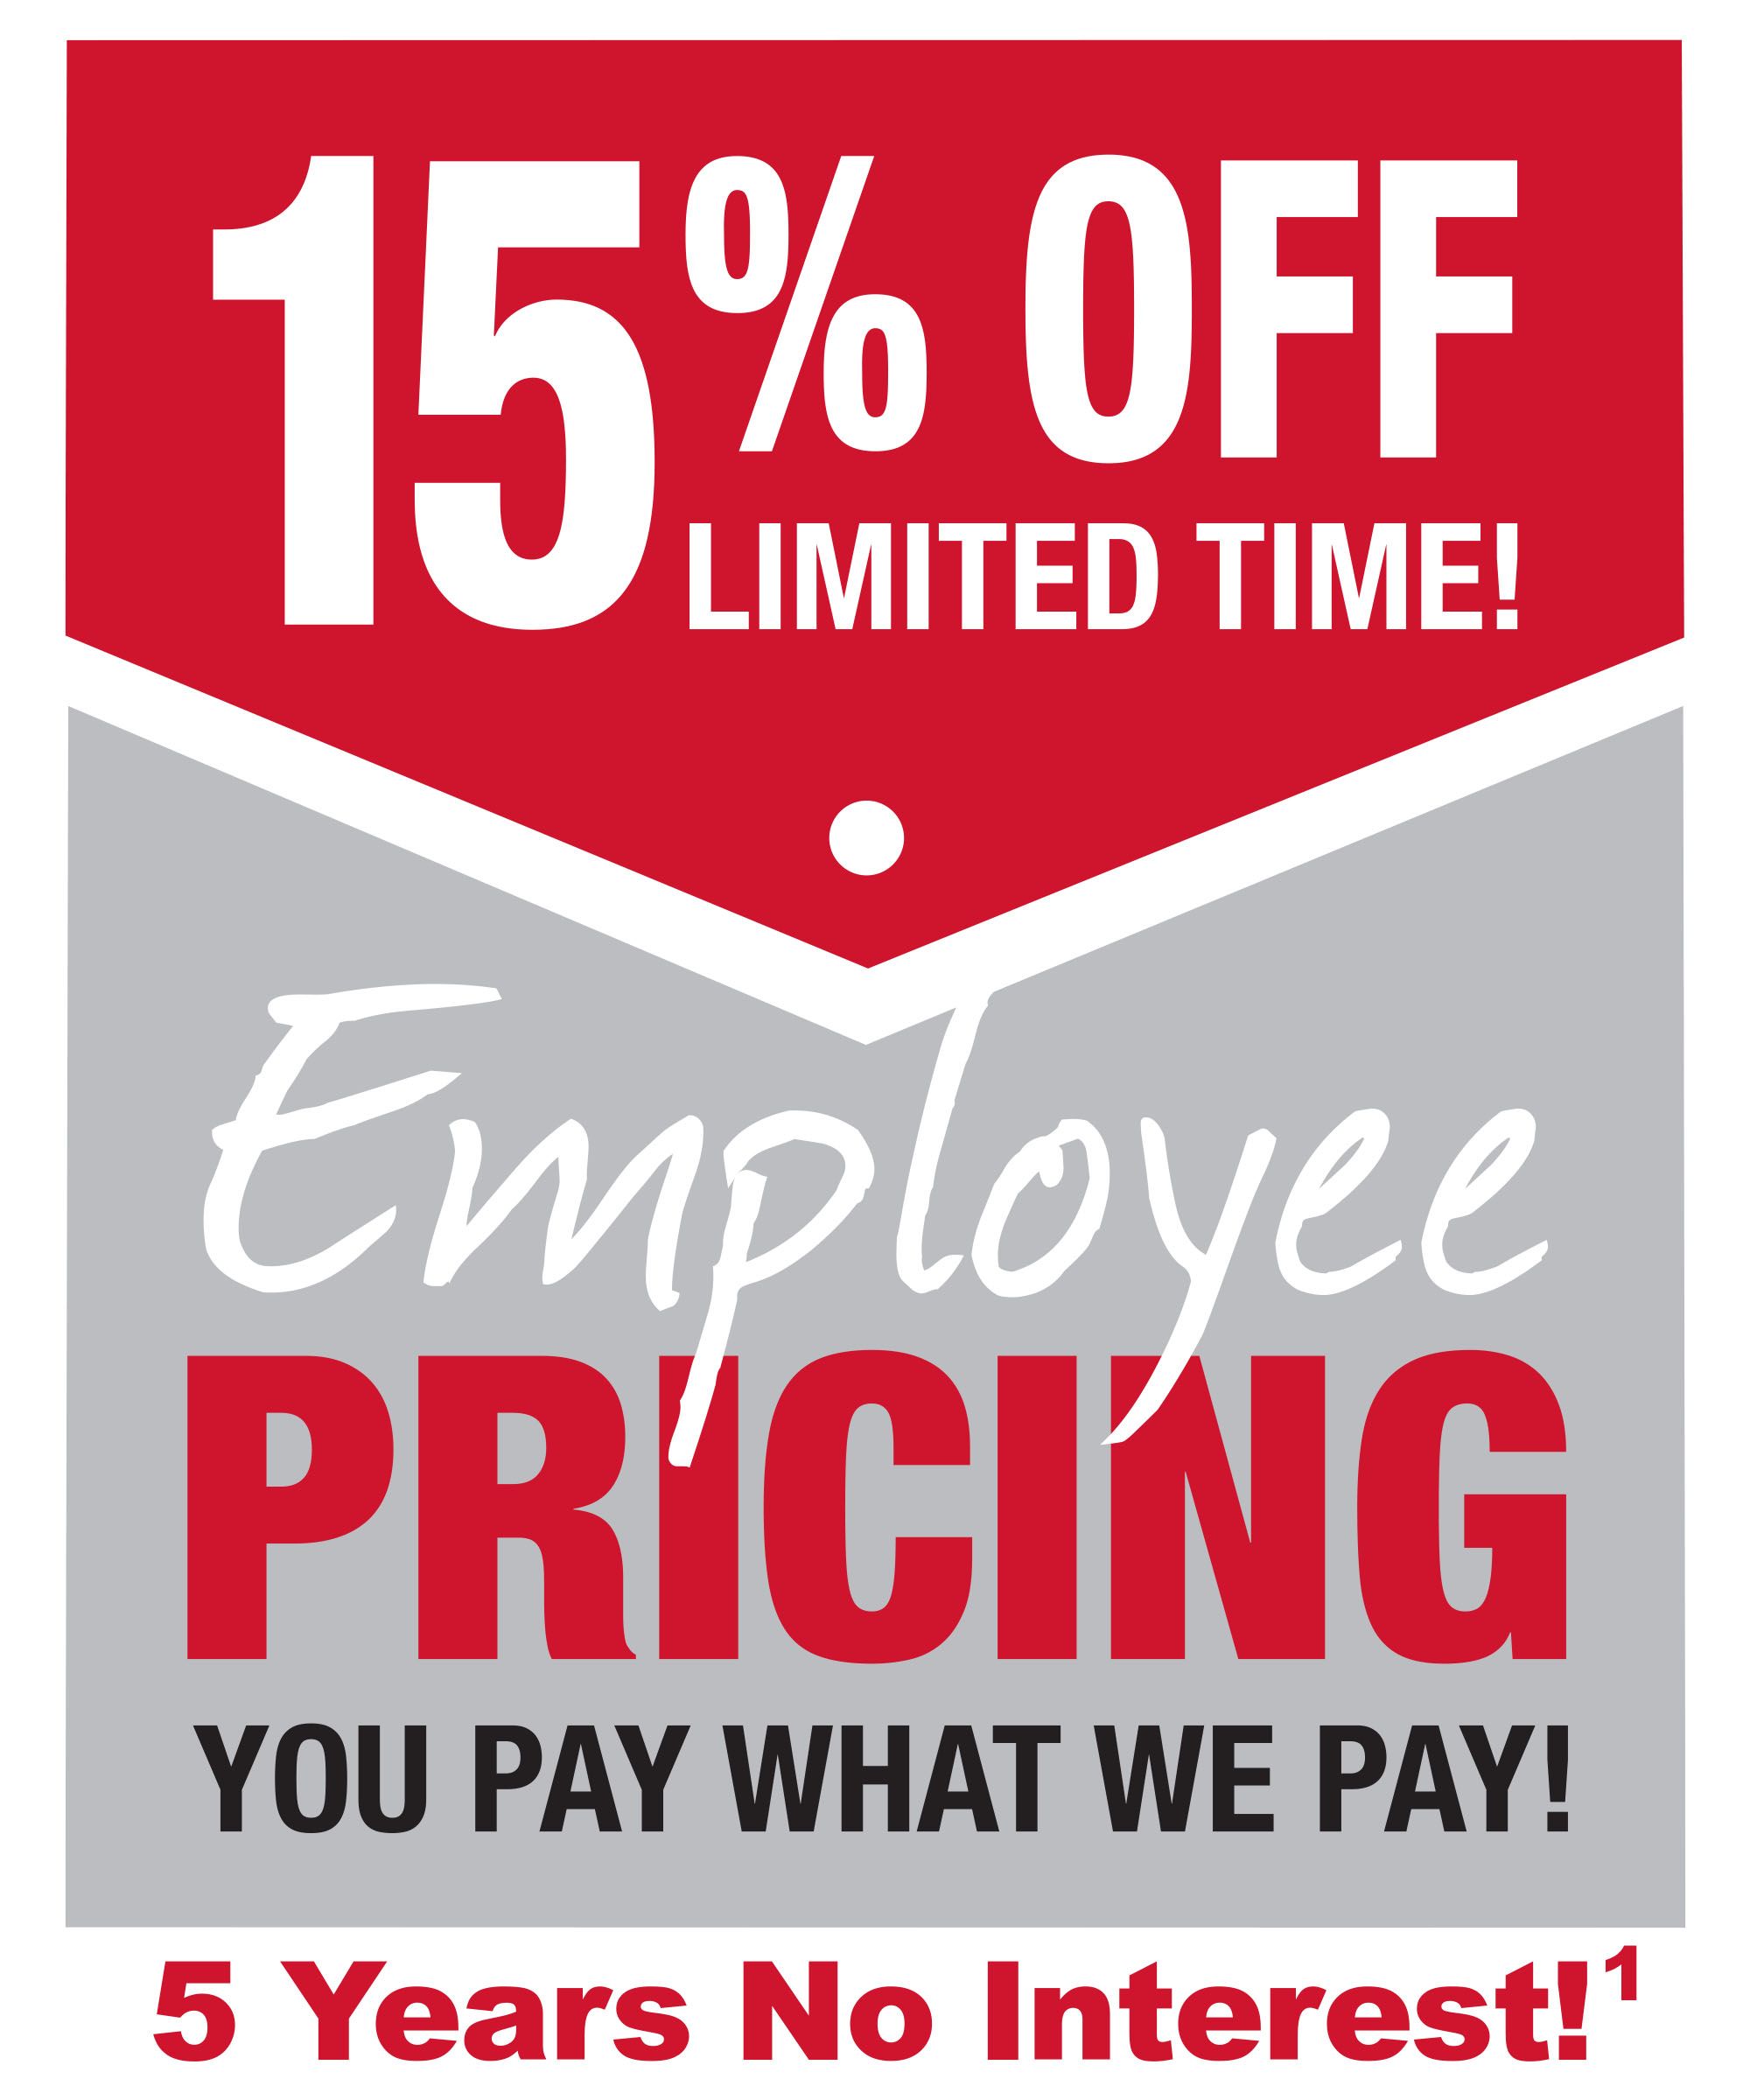 Employee Pricing Sale